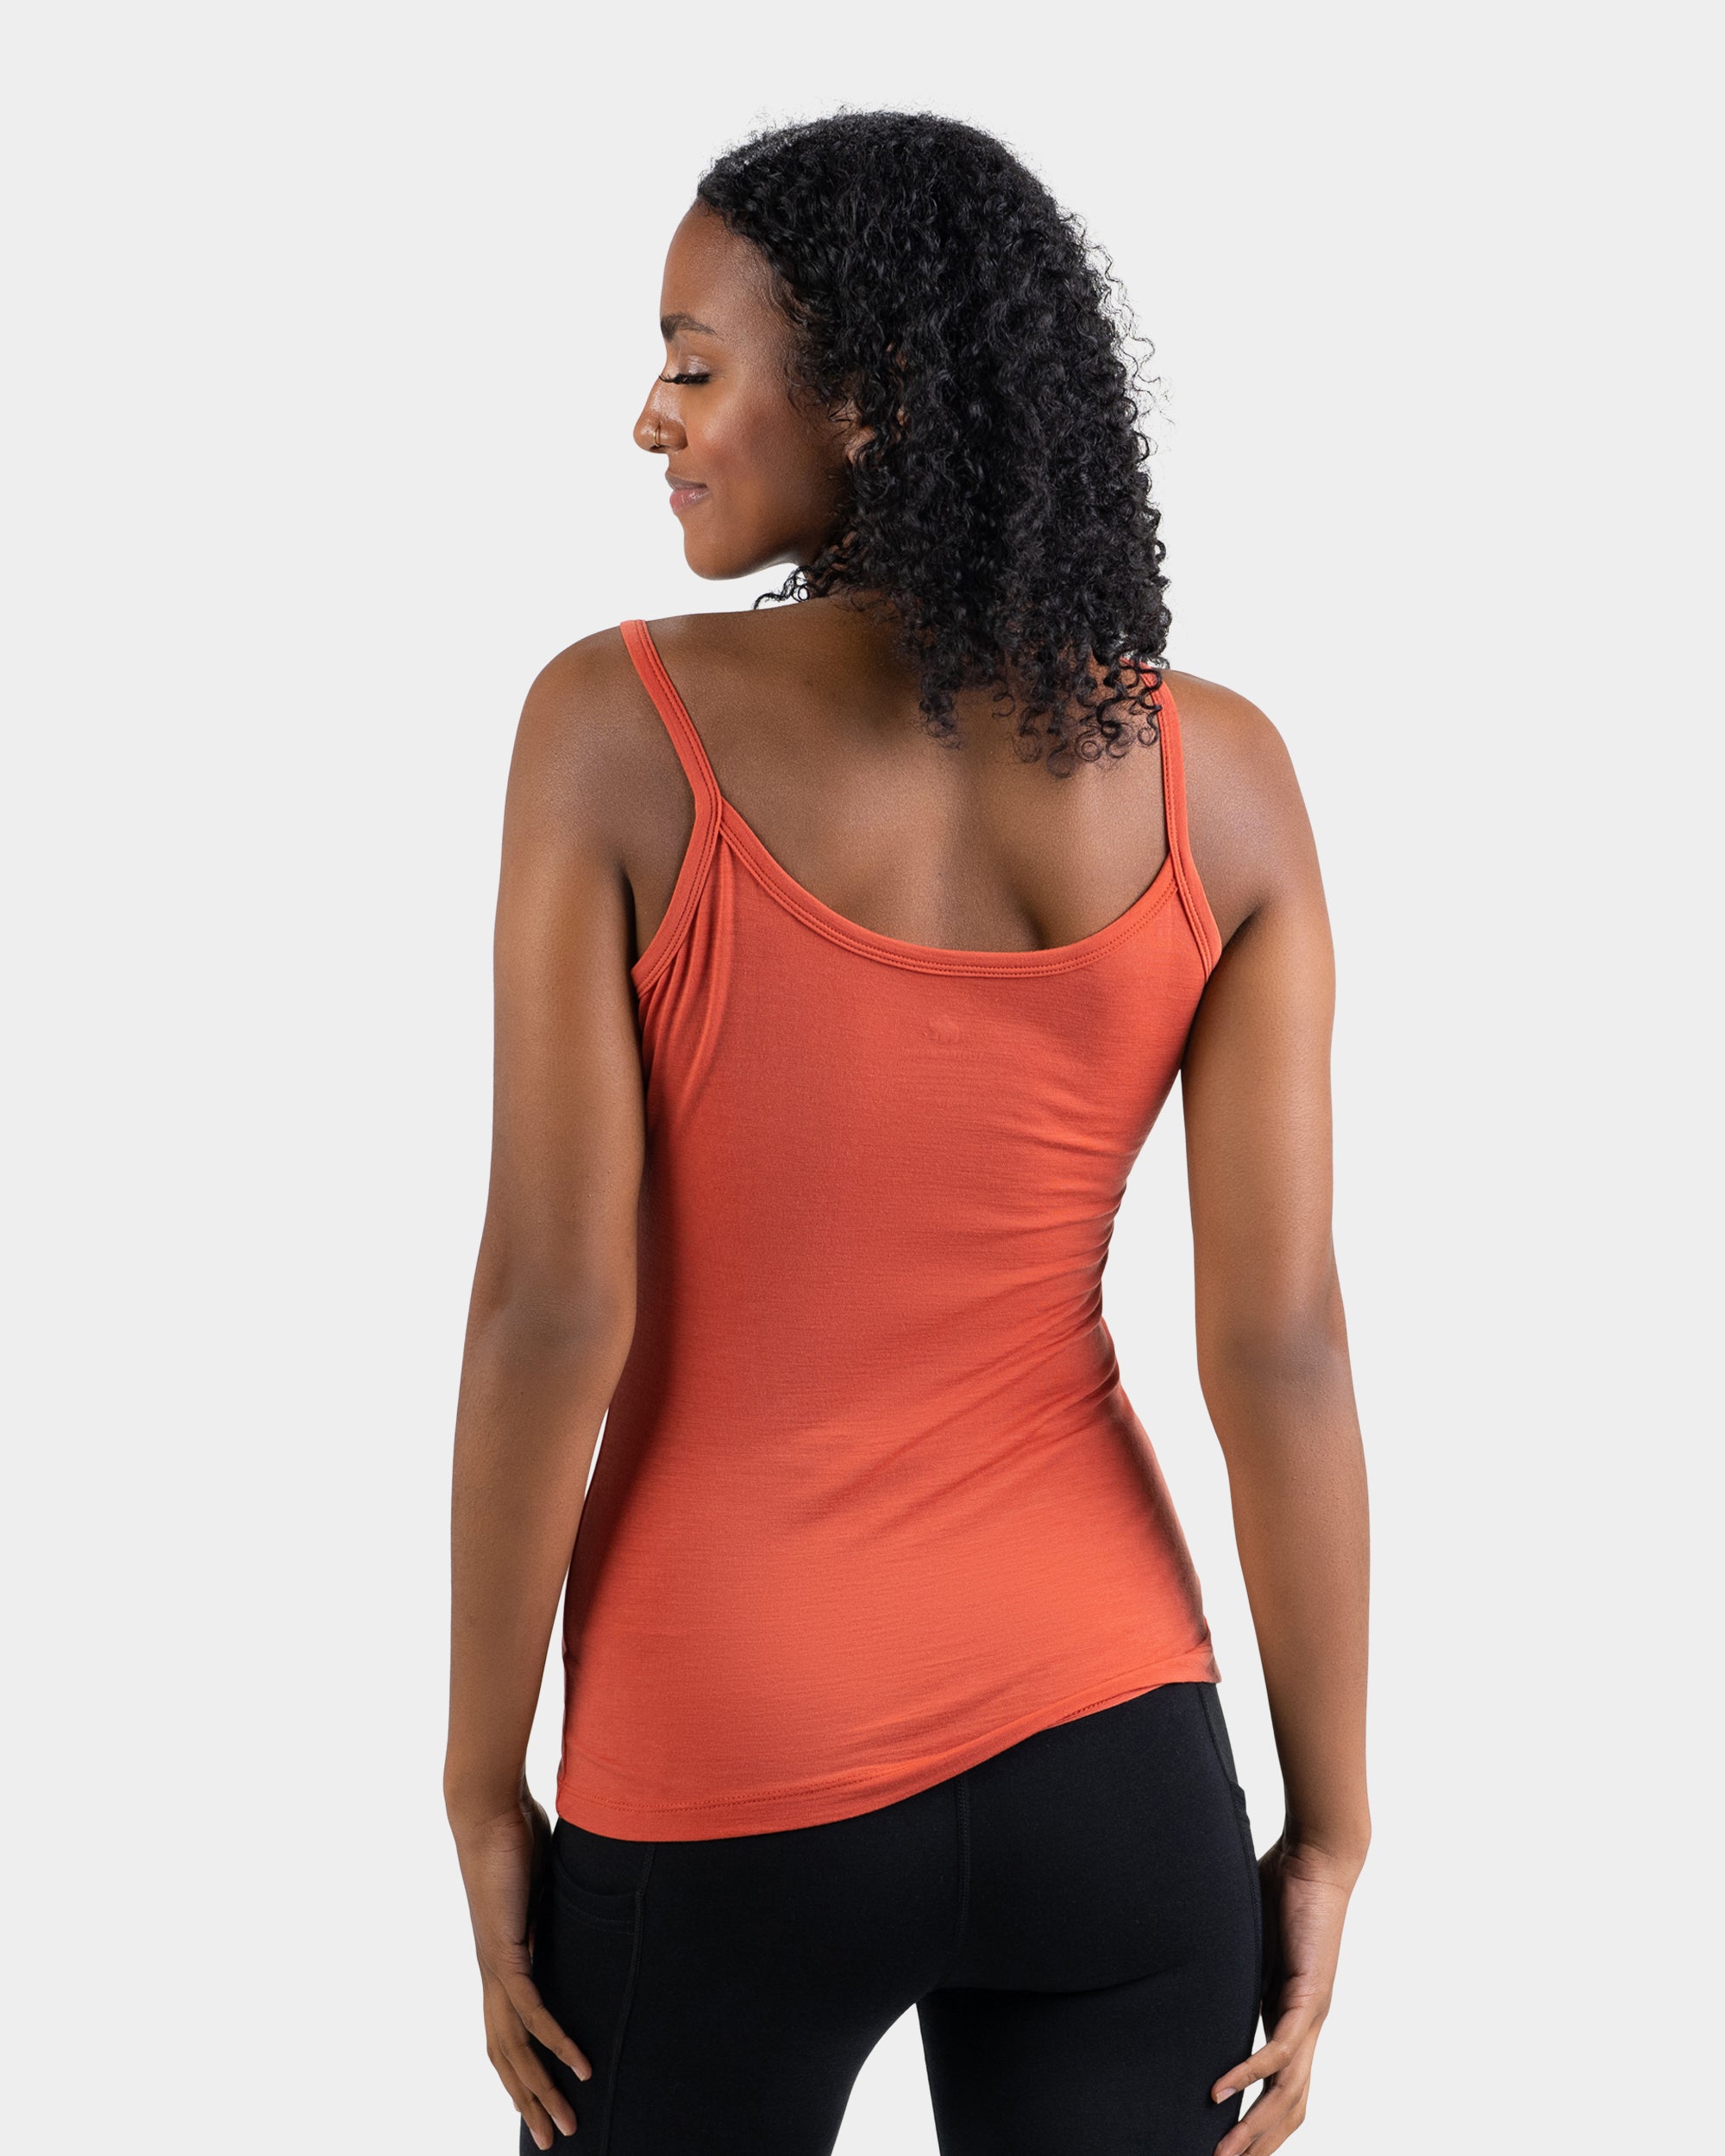 Terra Lifestyle Ribbed Racerback Tank Top for Women Workout Athletic  Athleisure